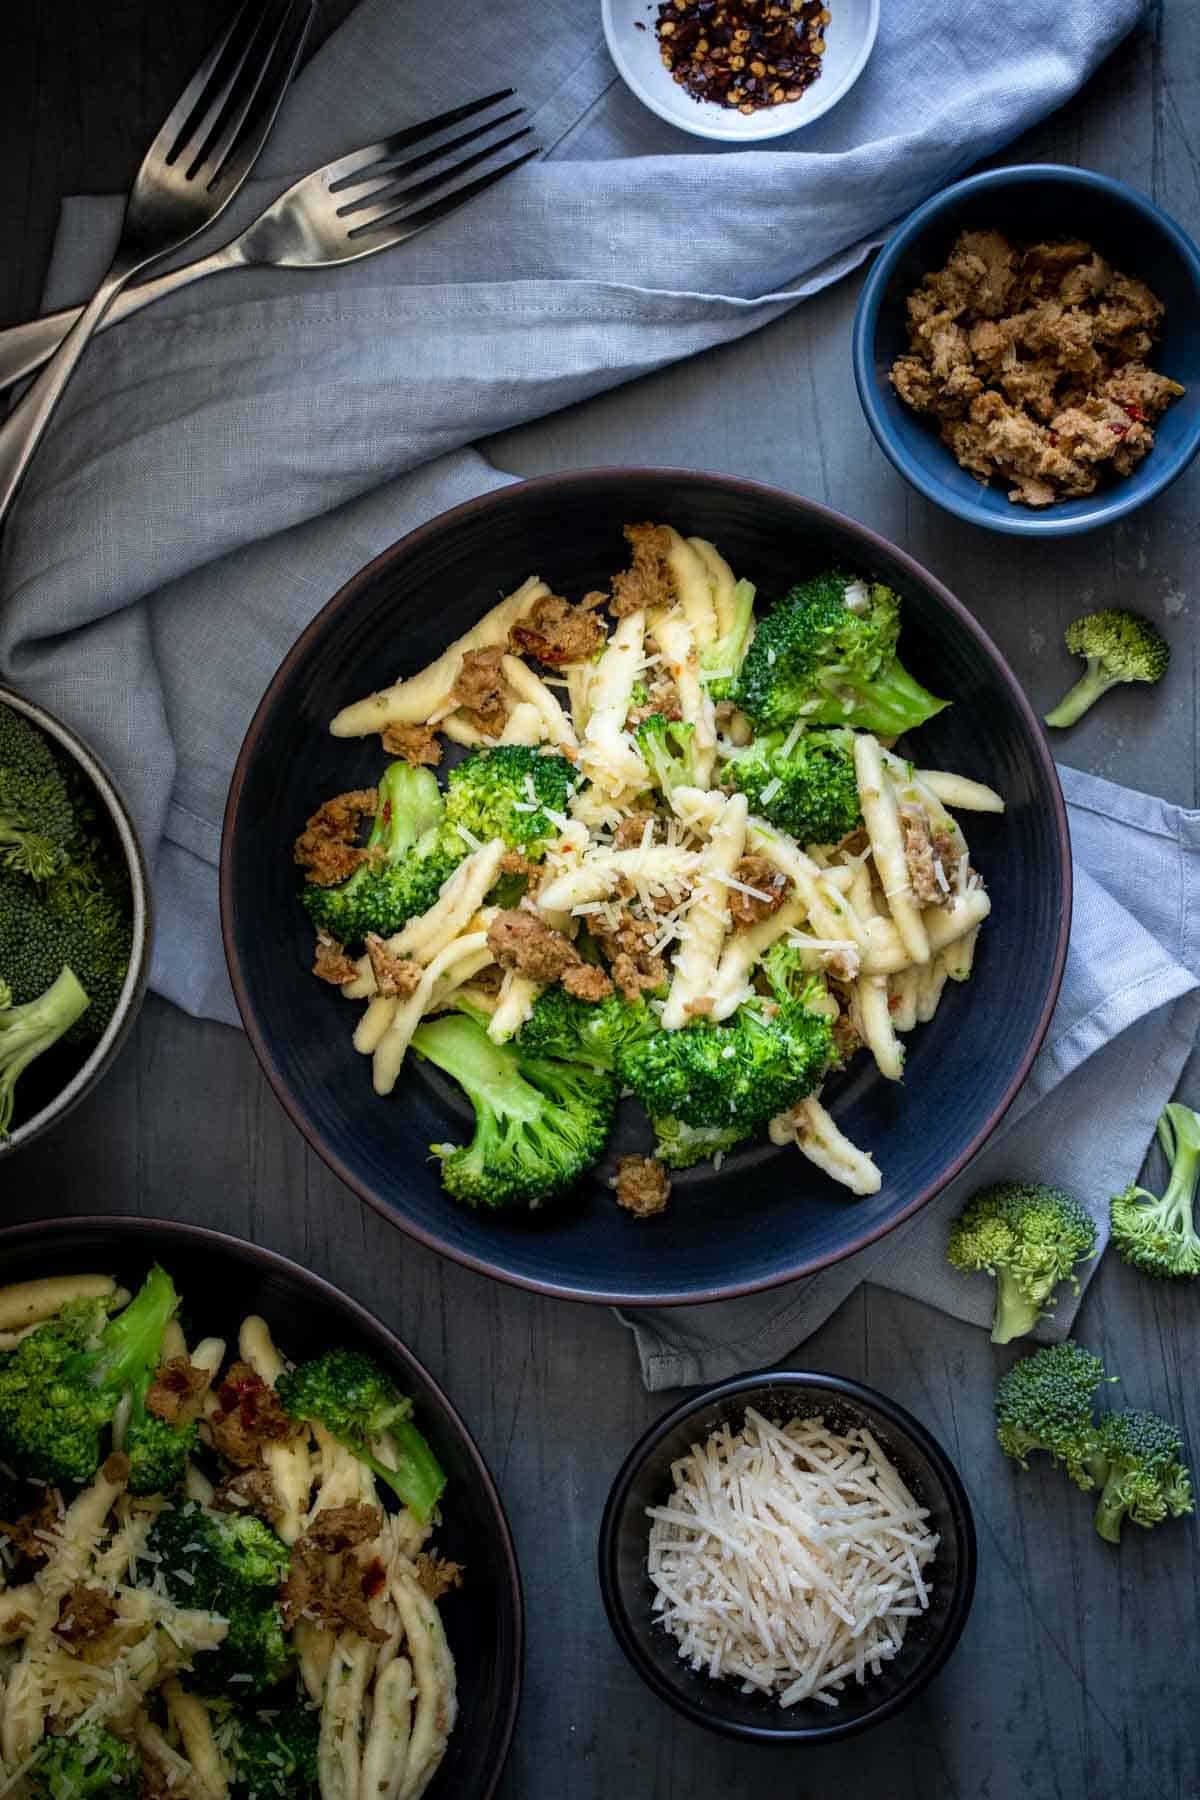 A bowl of cavatelli pasta mixed with broccoli and sausage and topped with parmesan in the light of a shadowed background